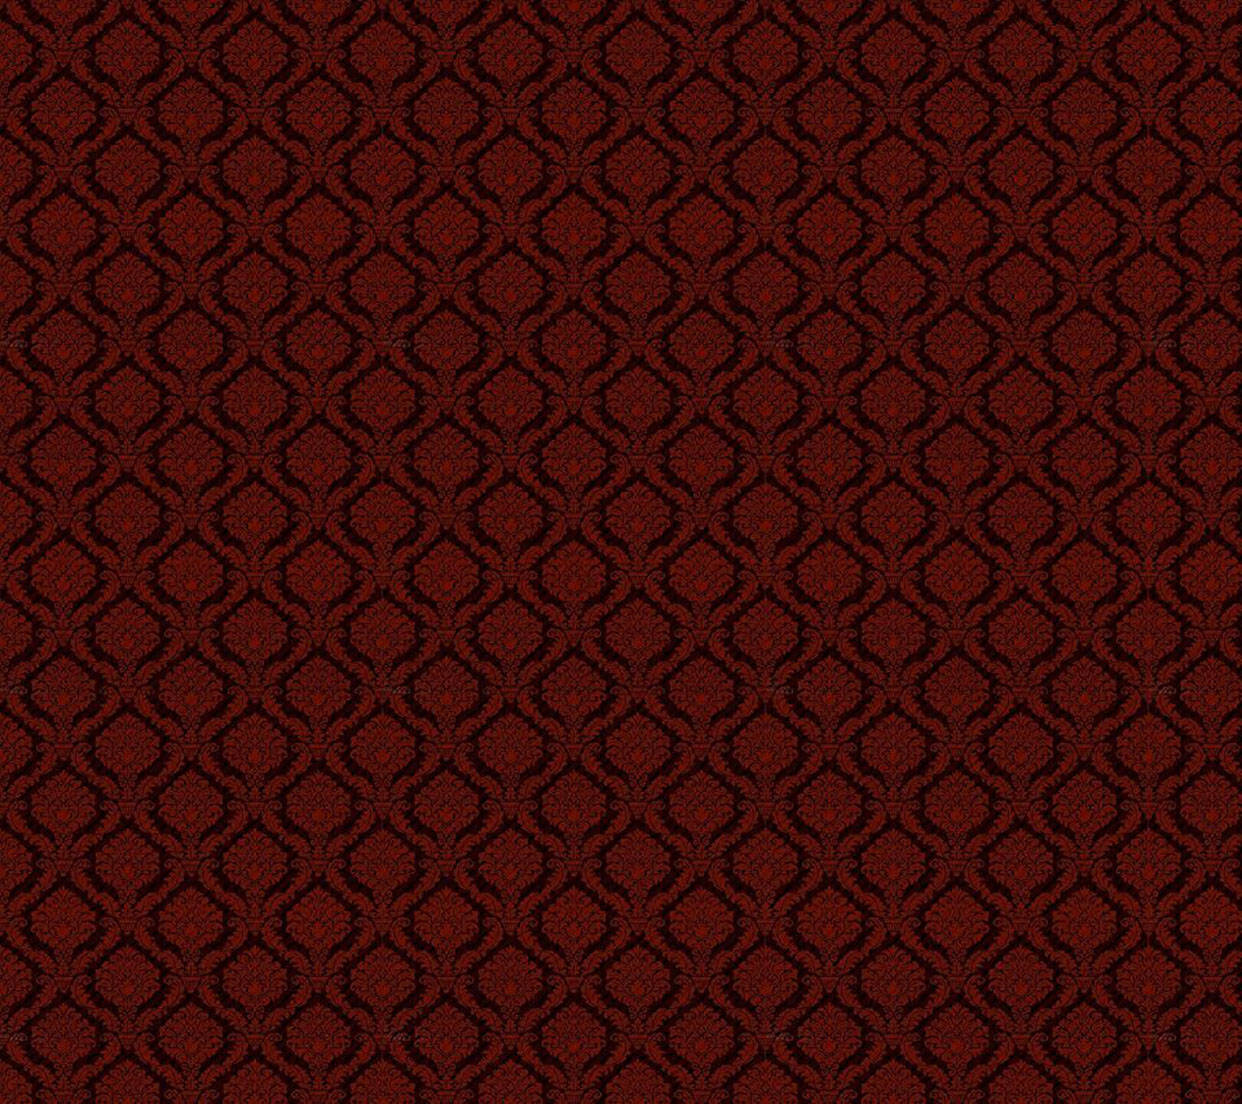 Dunkelrotesvintage-gucci-muster Wallpaper